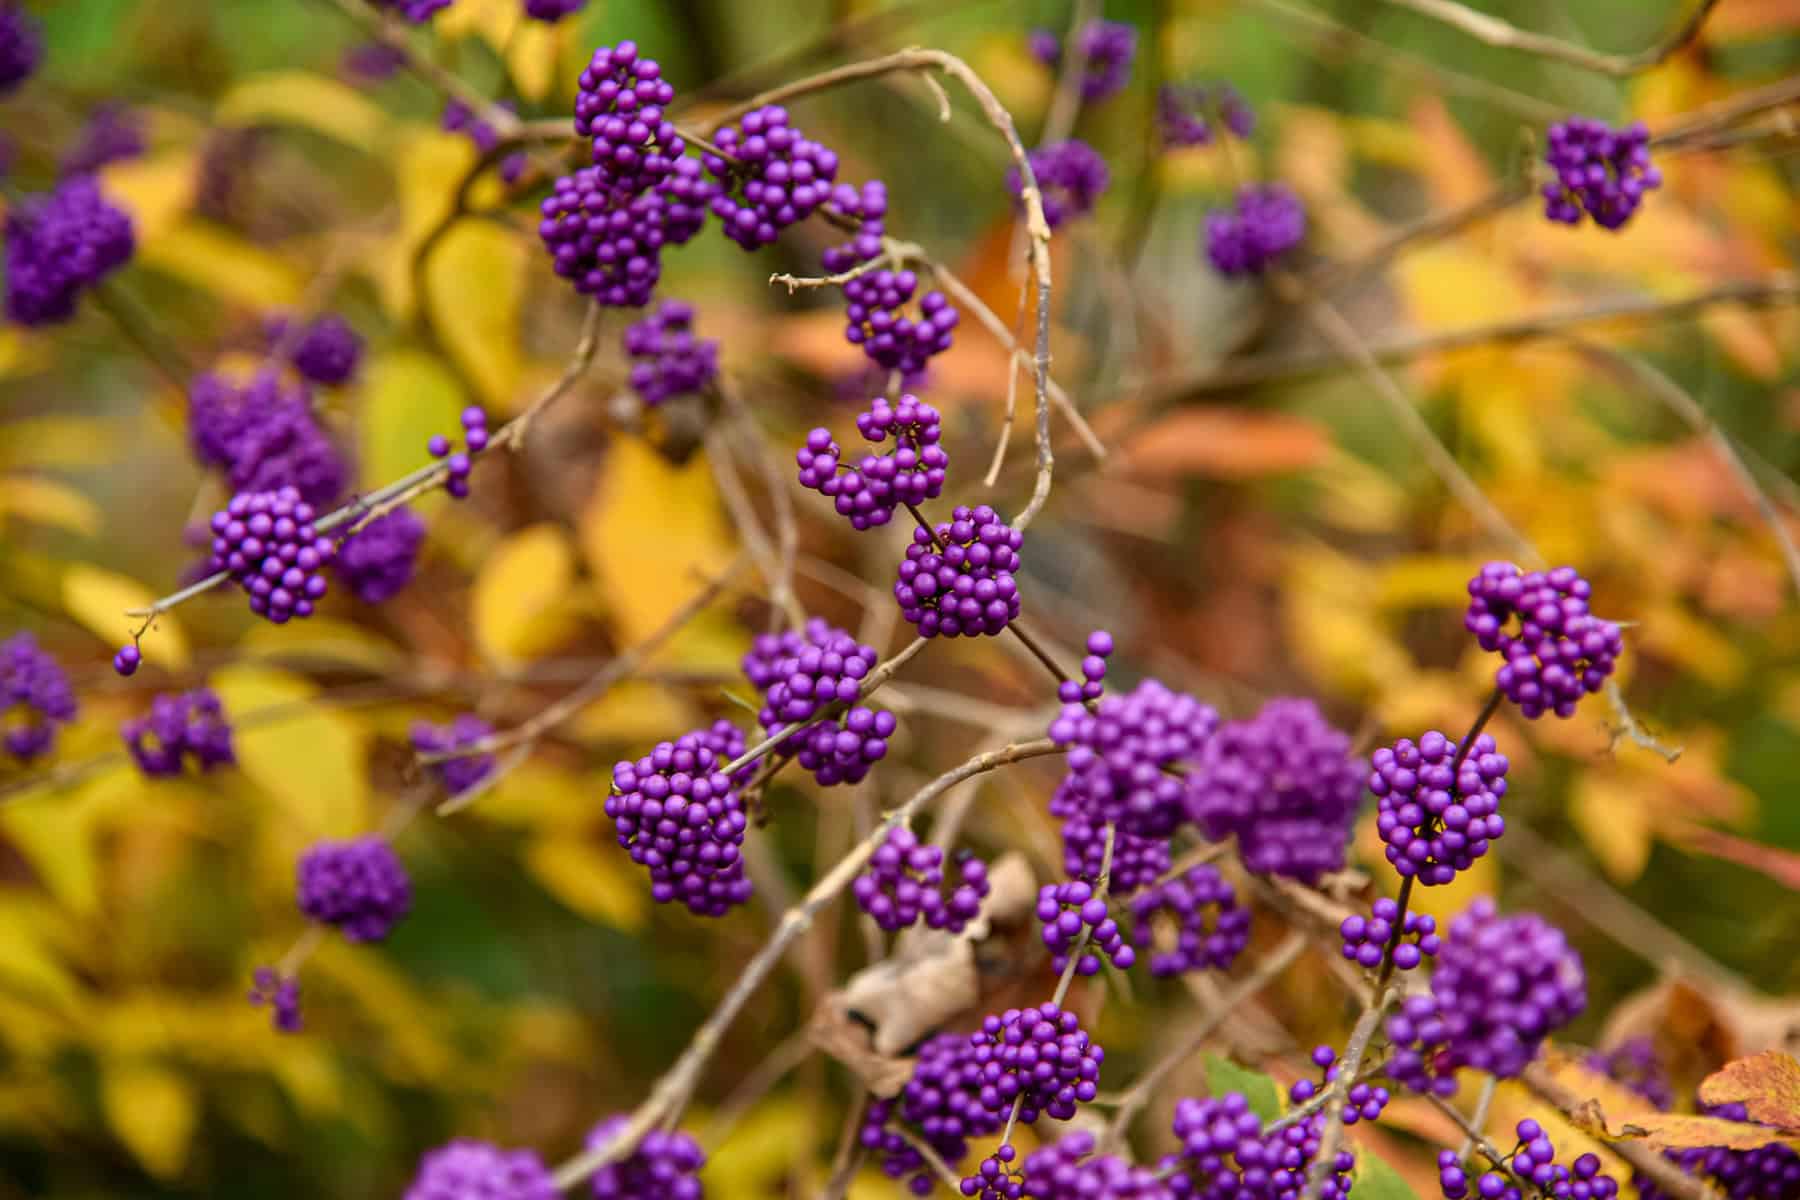 Close-up of clusters of vibrant purple Callicarpa americana, or Beautyberry, on thin, intertwined branches. The background is filled with soft-focus yellow and green foliage, creating a contrasting and colorful autumn scene reminiscent of Mississippi's picturesque landscapes.